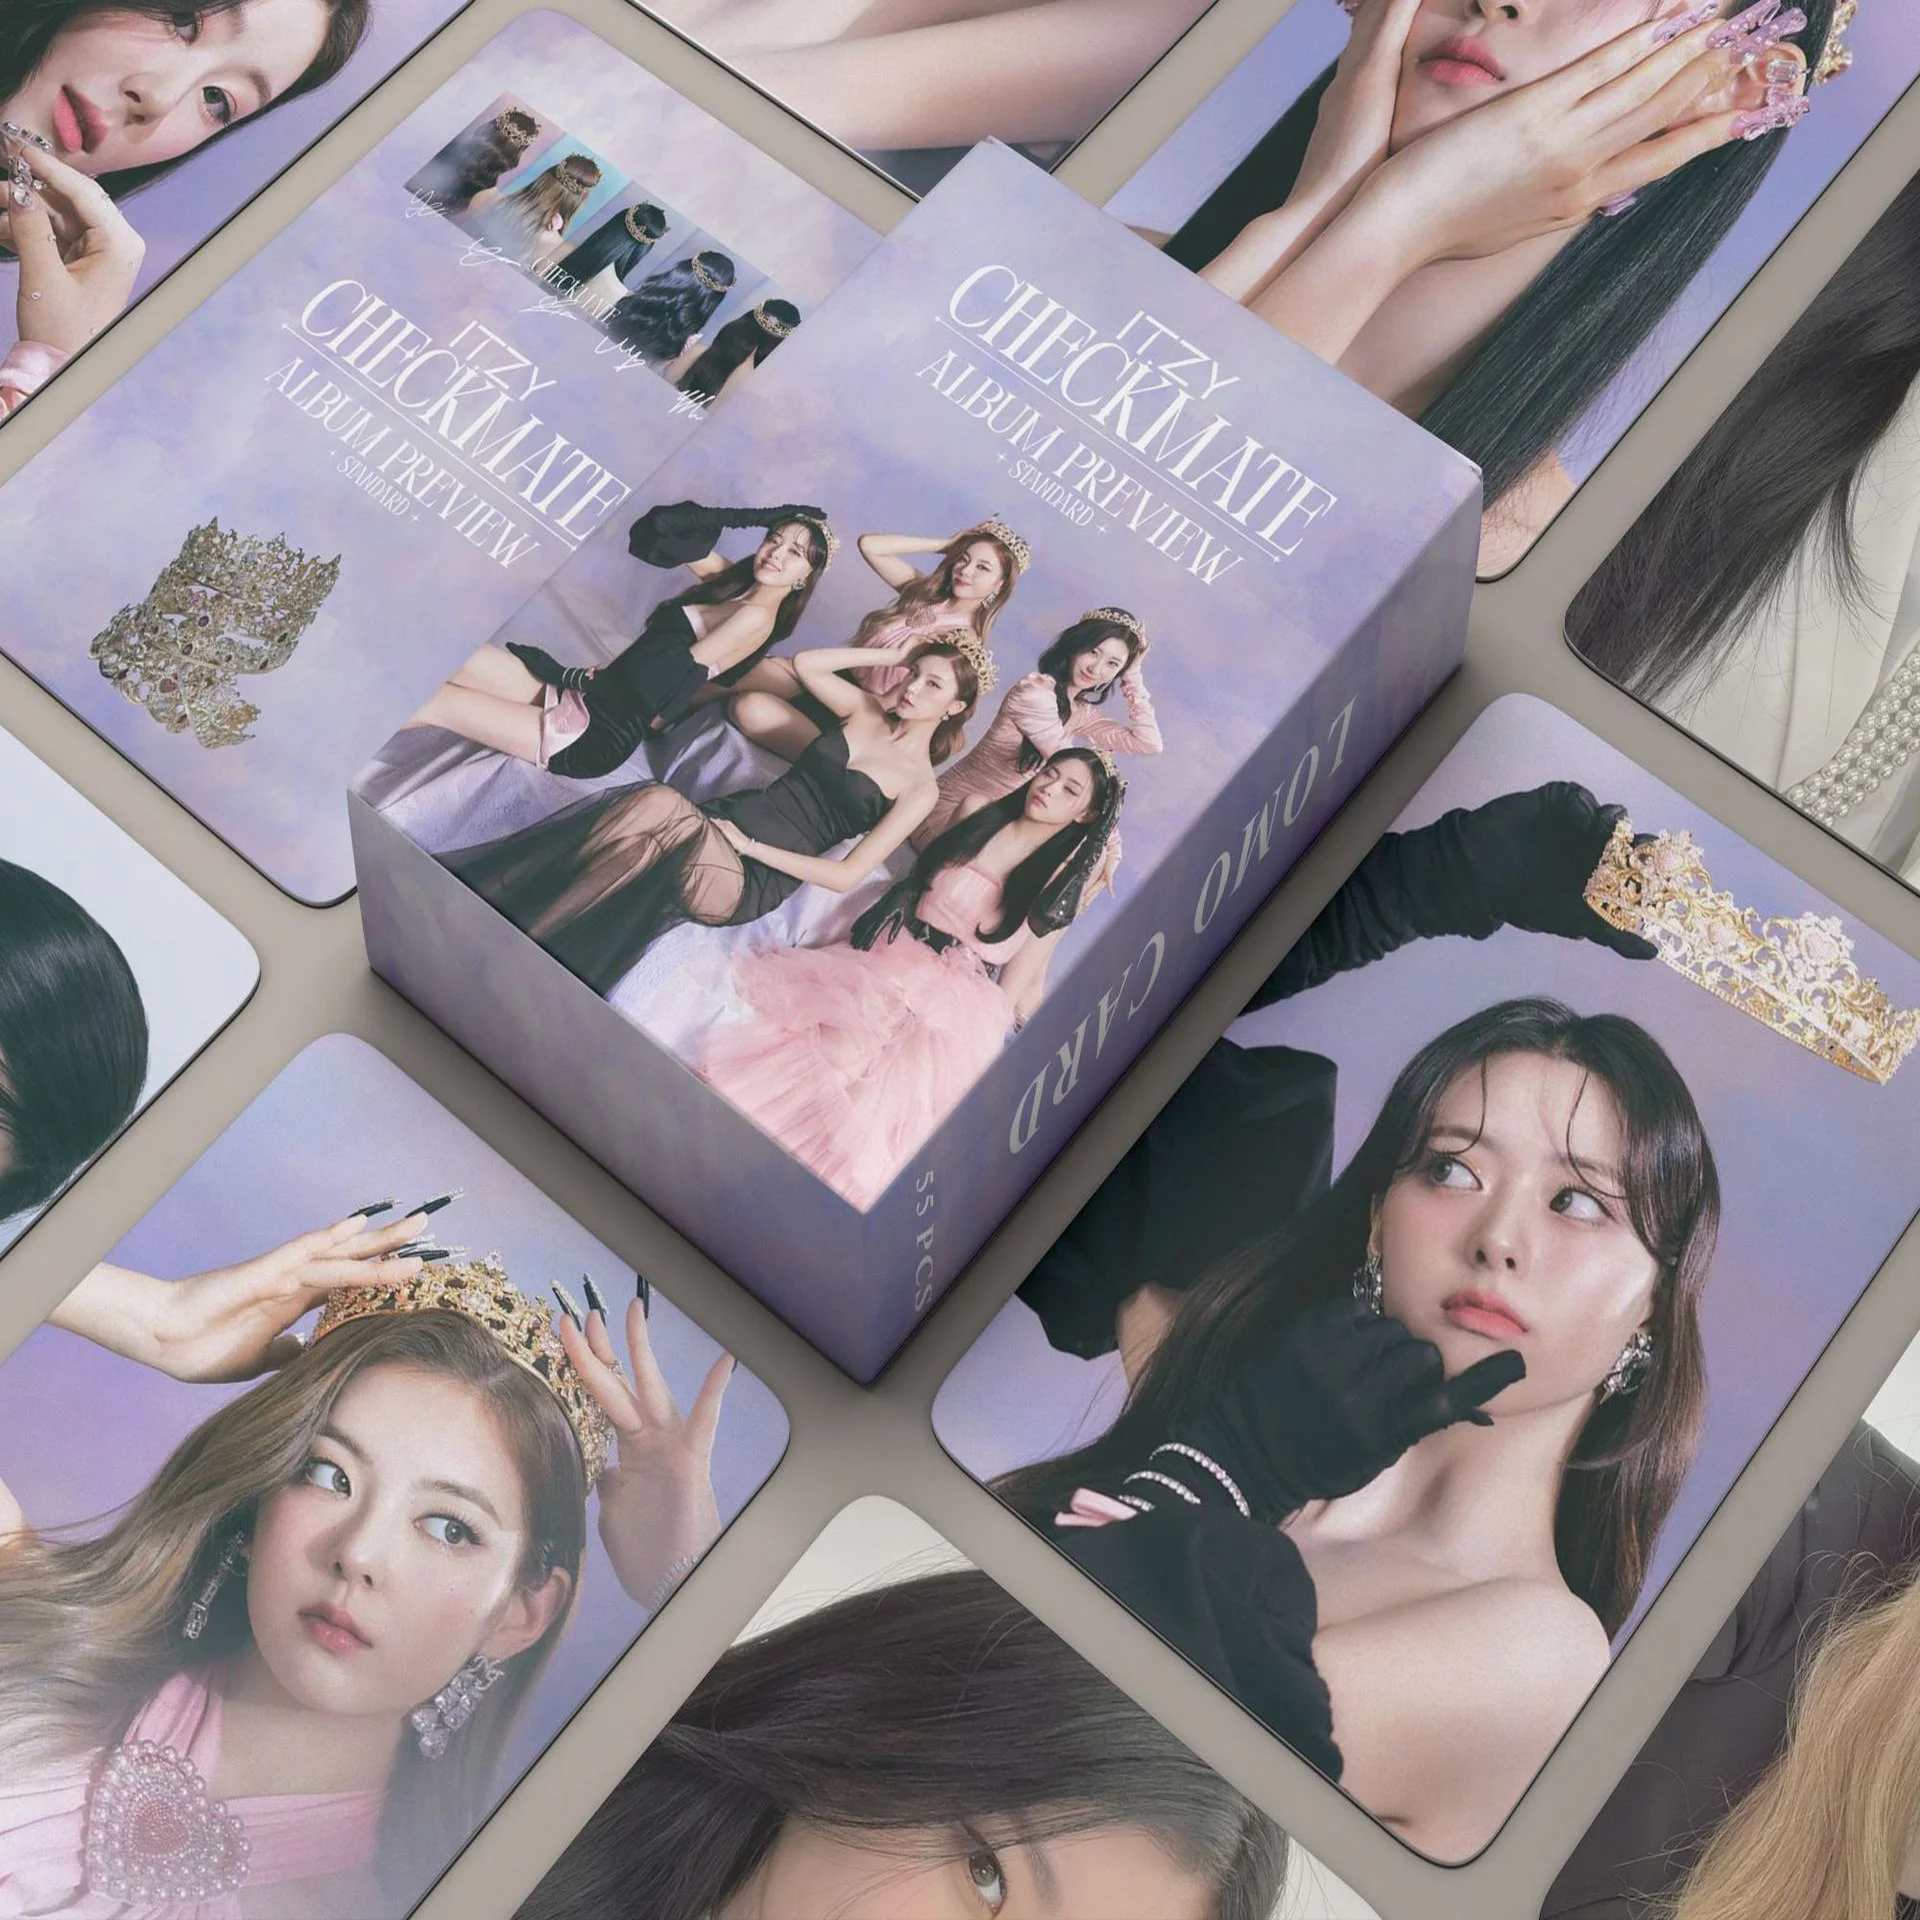 hot kpop album photo card bangtan boys collection photocard self made paper cards lomo cards postcard self made photo fan gift 55pcs/set Kpop ITZY CHECKMATE BEST FRIENDS FOREVER Lomo Cards Greeting Season Photo album Cards Photocard Postcard Fashion